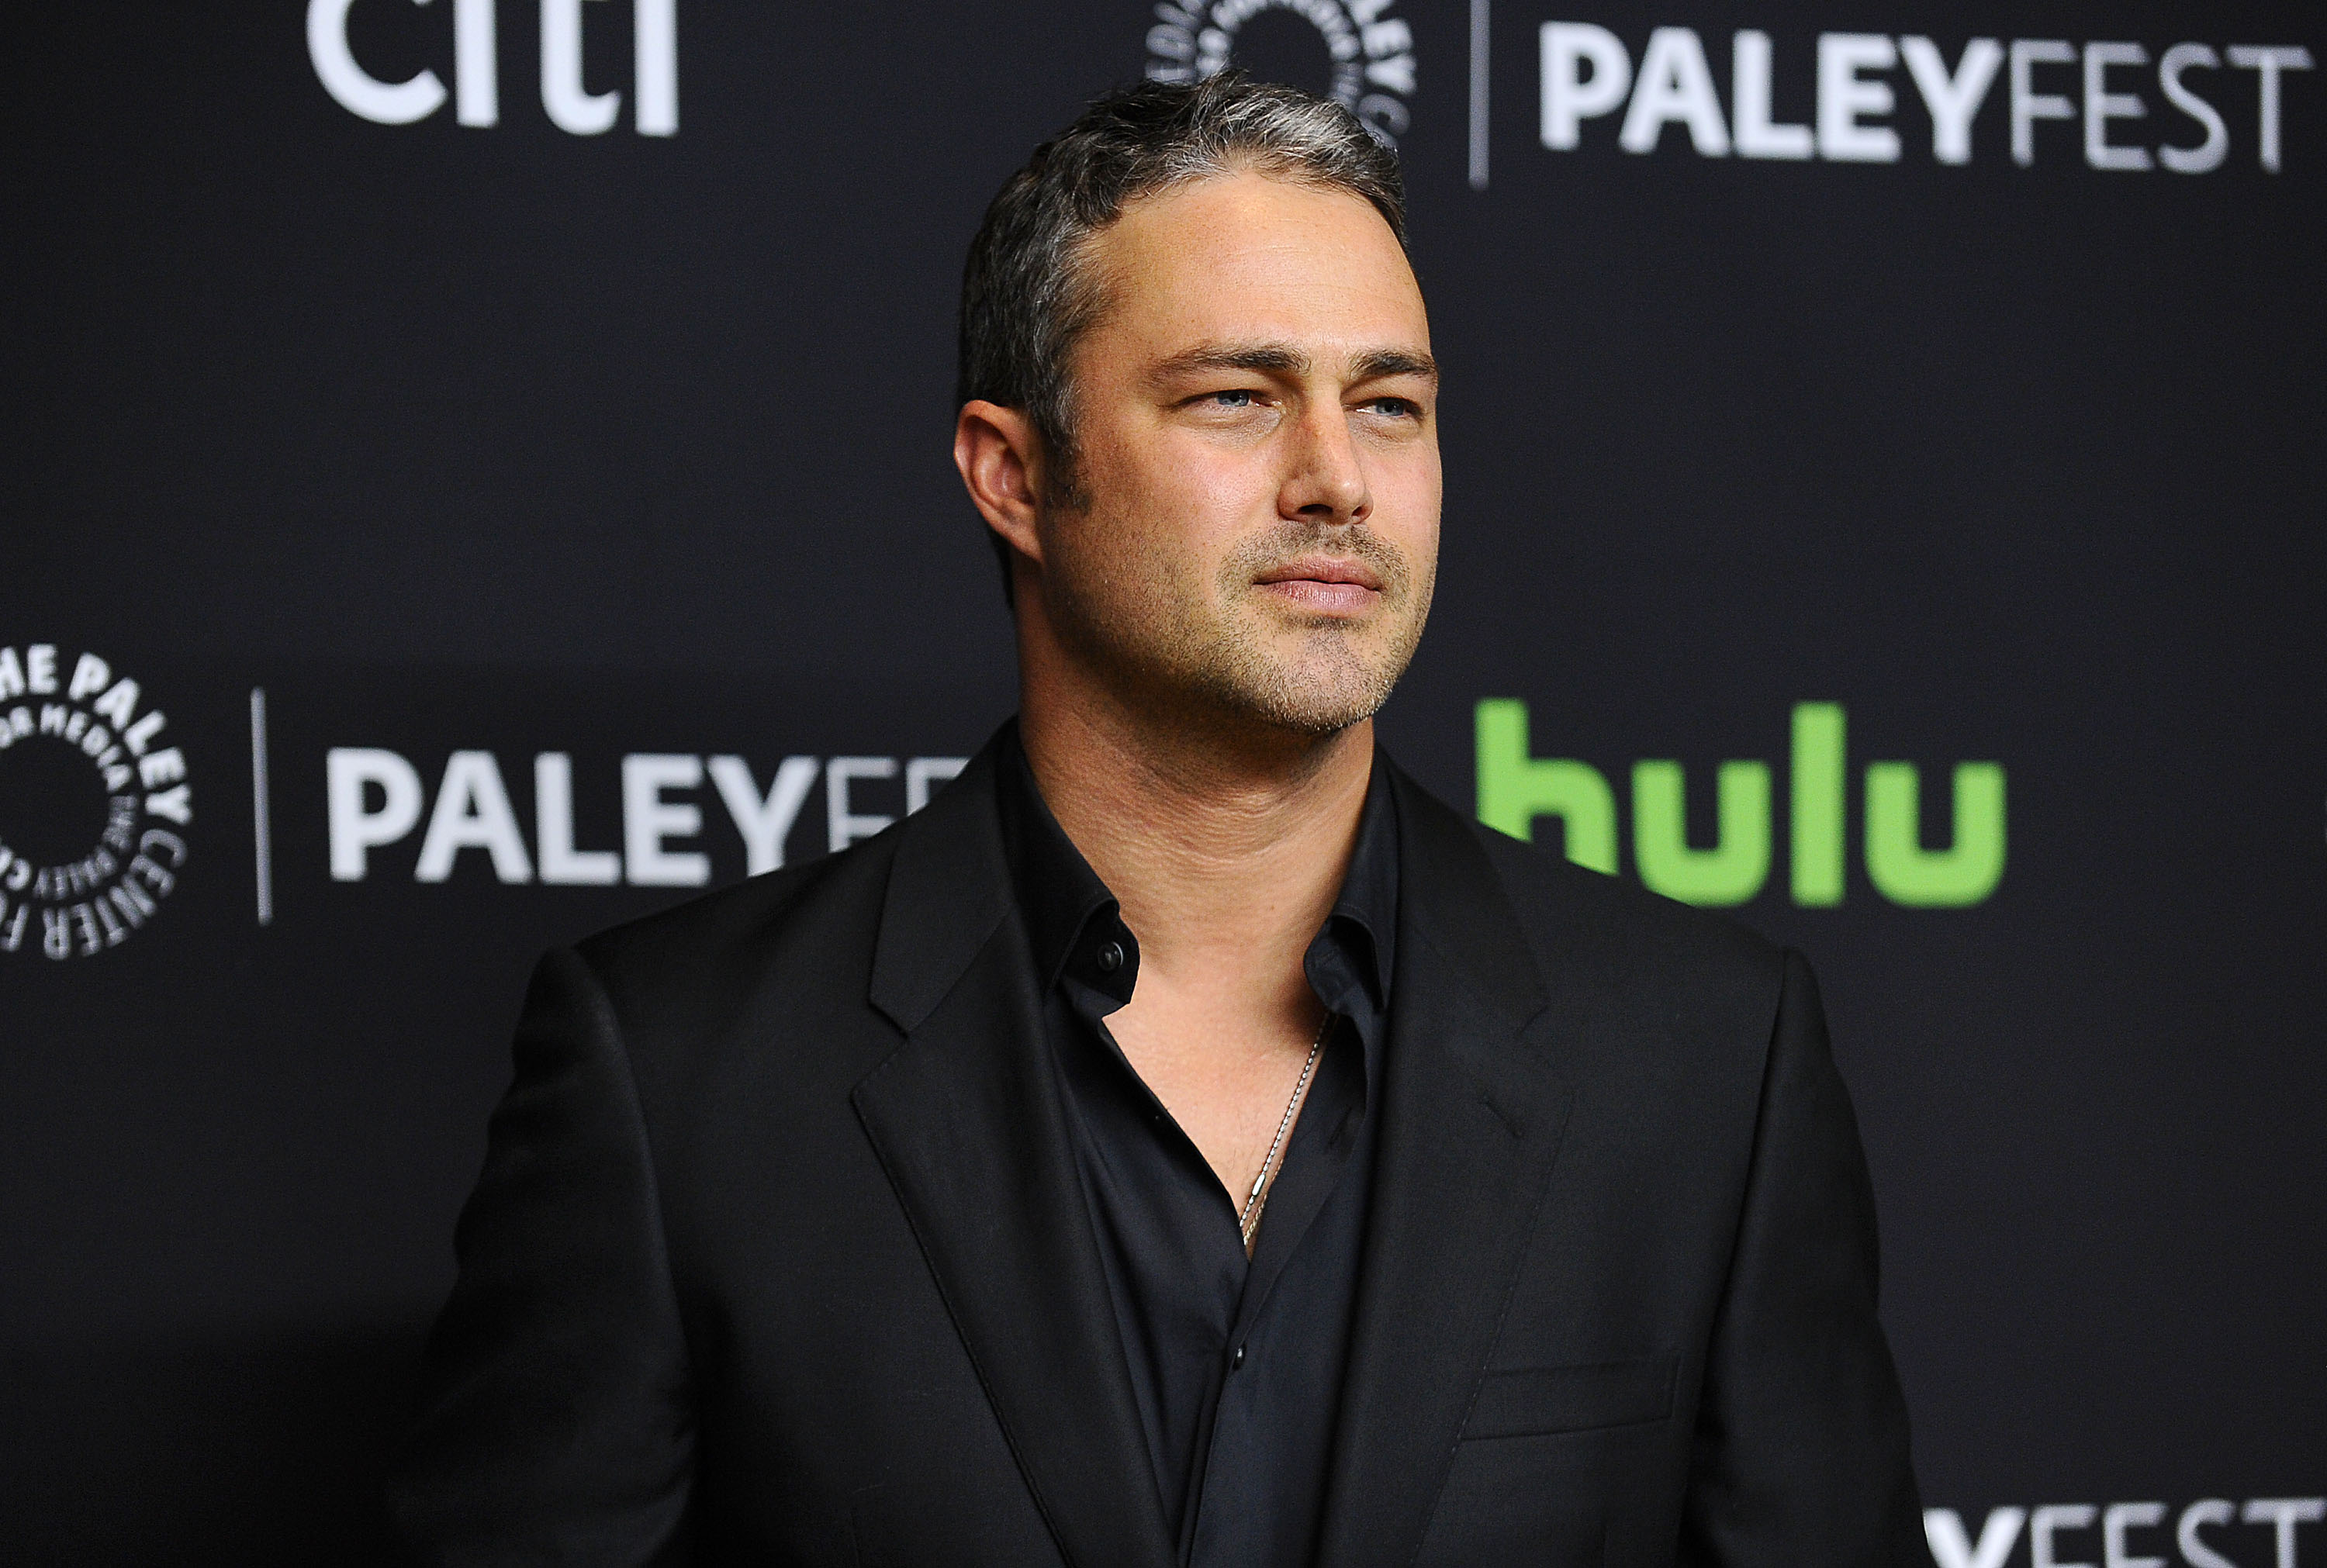 Chicago Fire: Taylor Kinney Net Worth and How He Became Famous